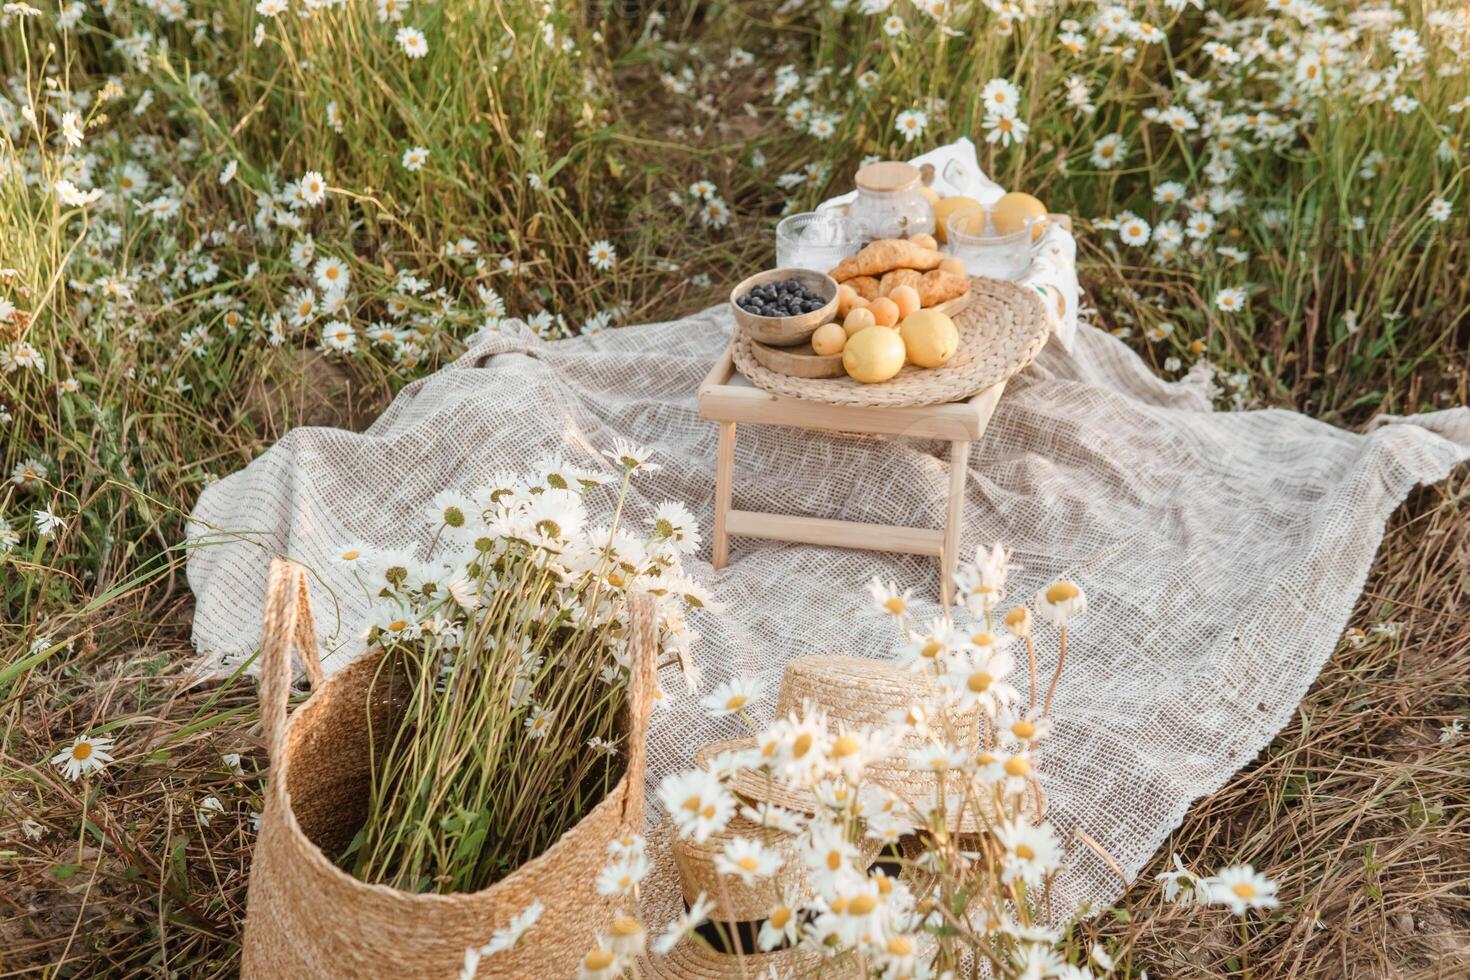 Picnic in the chamomile field. A large field of flowering daisies. The concept of outdoor recreation. photo